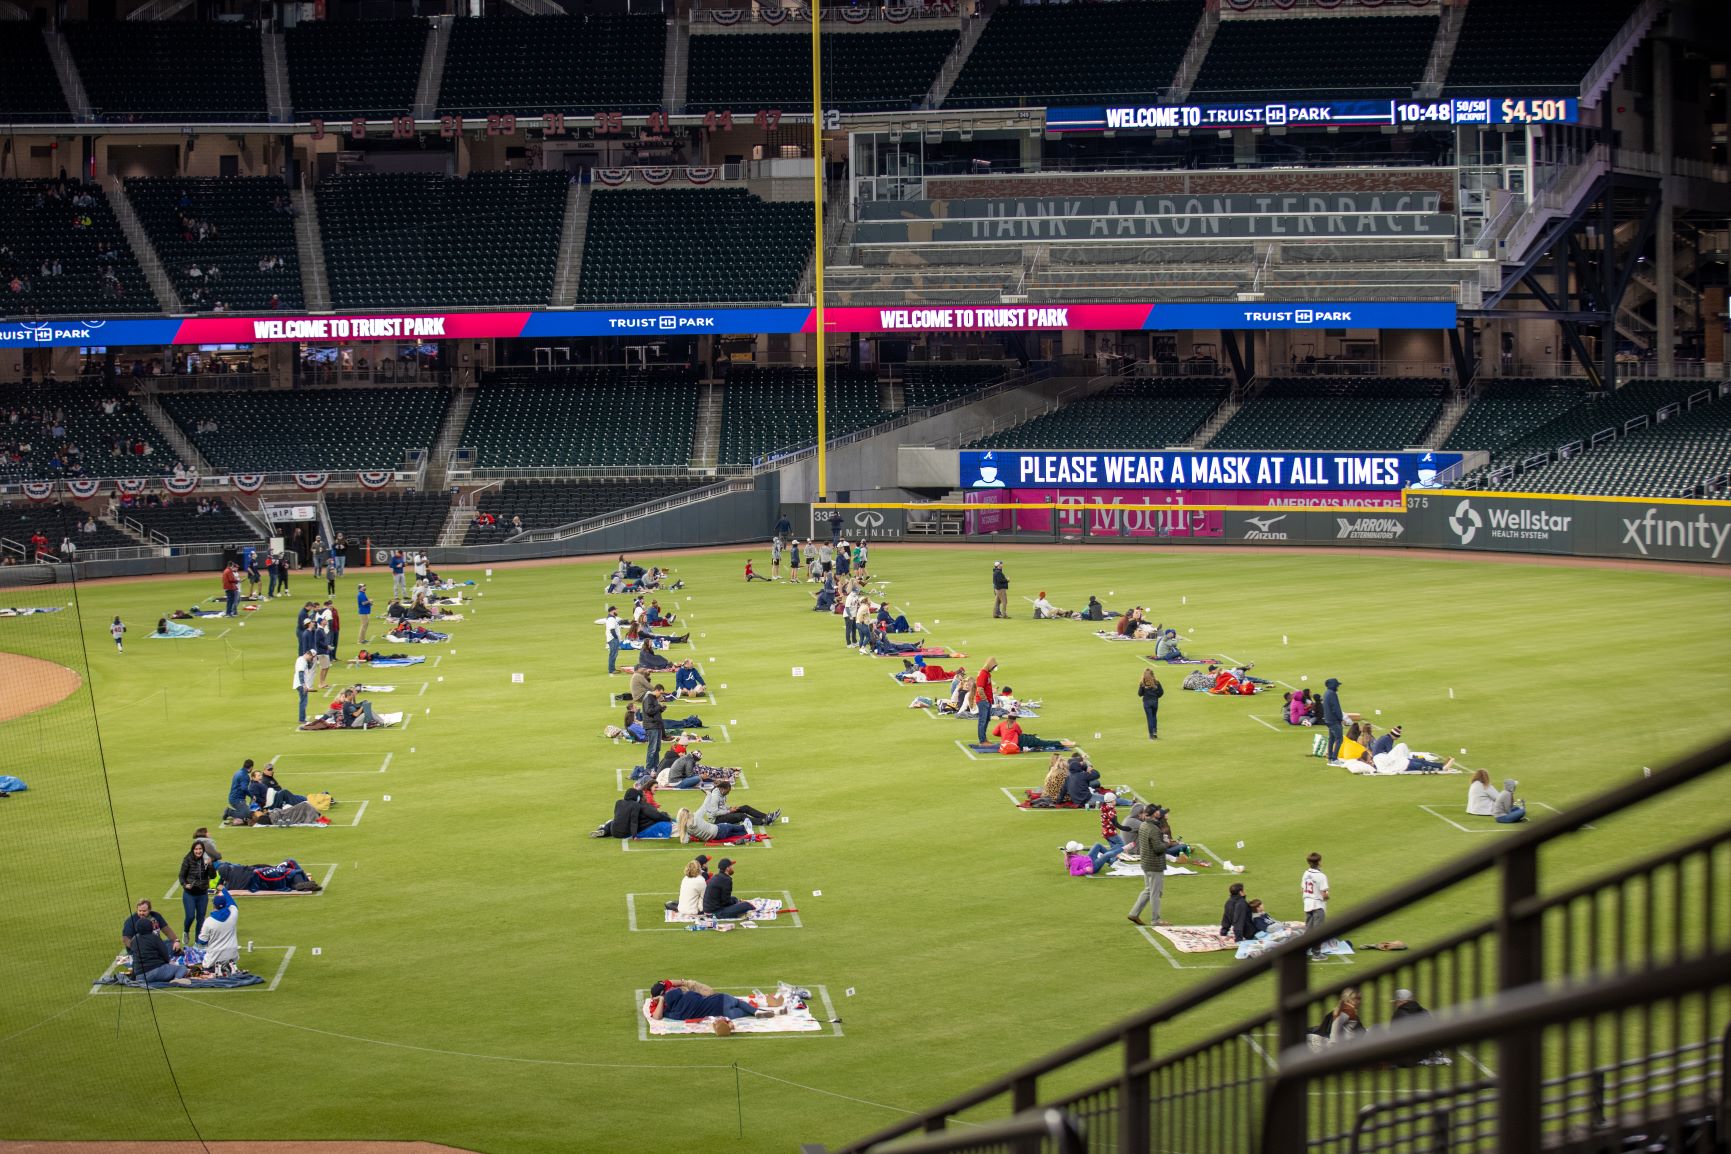 Atlanta Braves on X: THANK YOU to the 21,000+ fans who showed up to  @TruistPark for this week's #Postseason Workouts!   / X